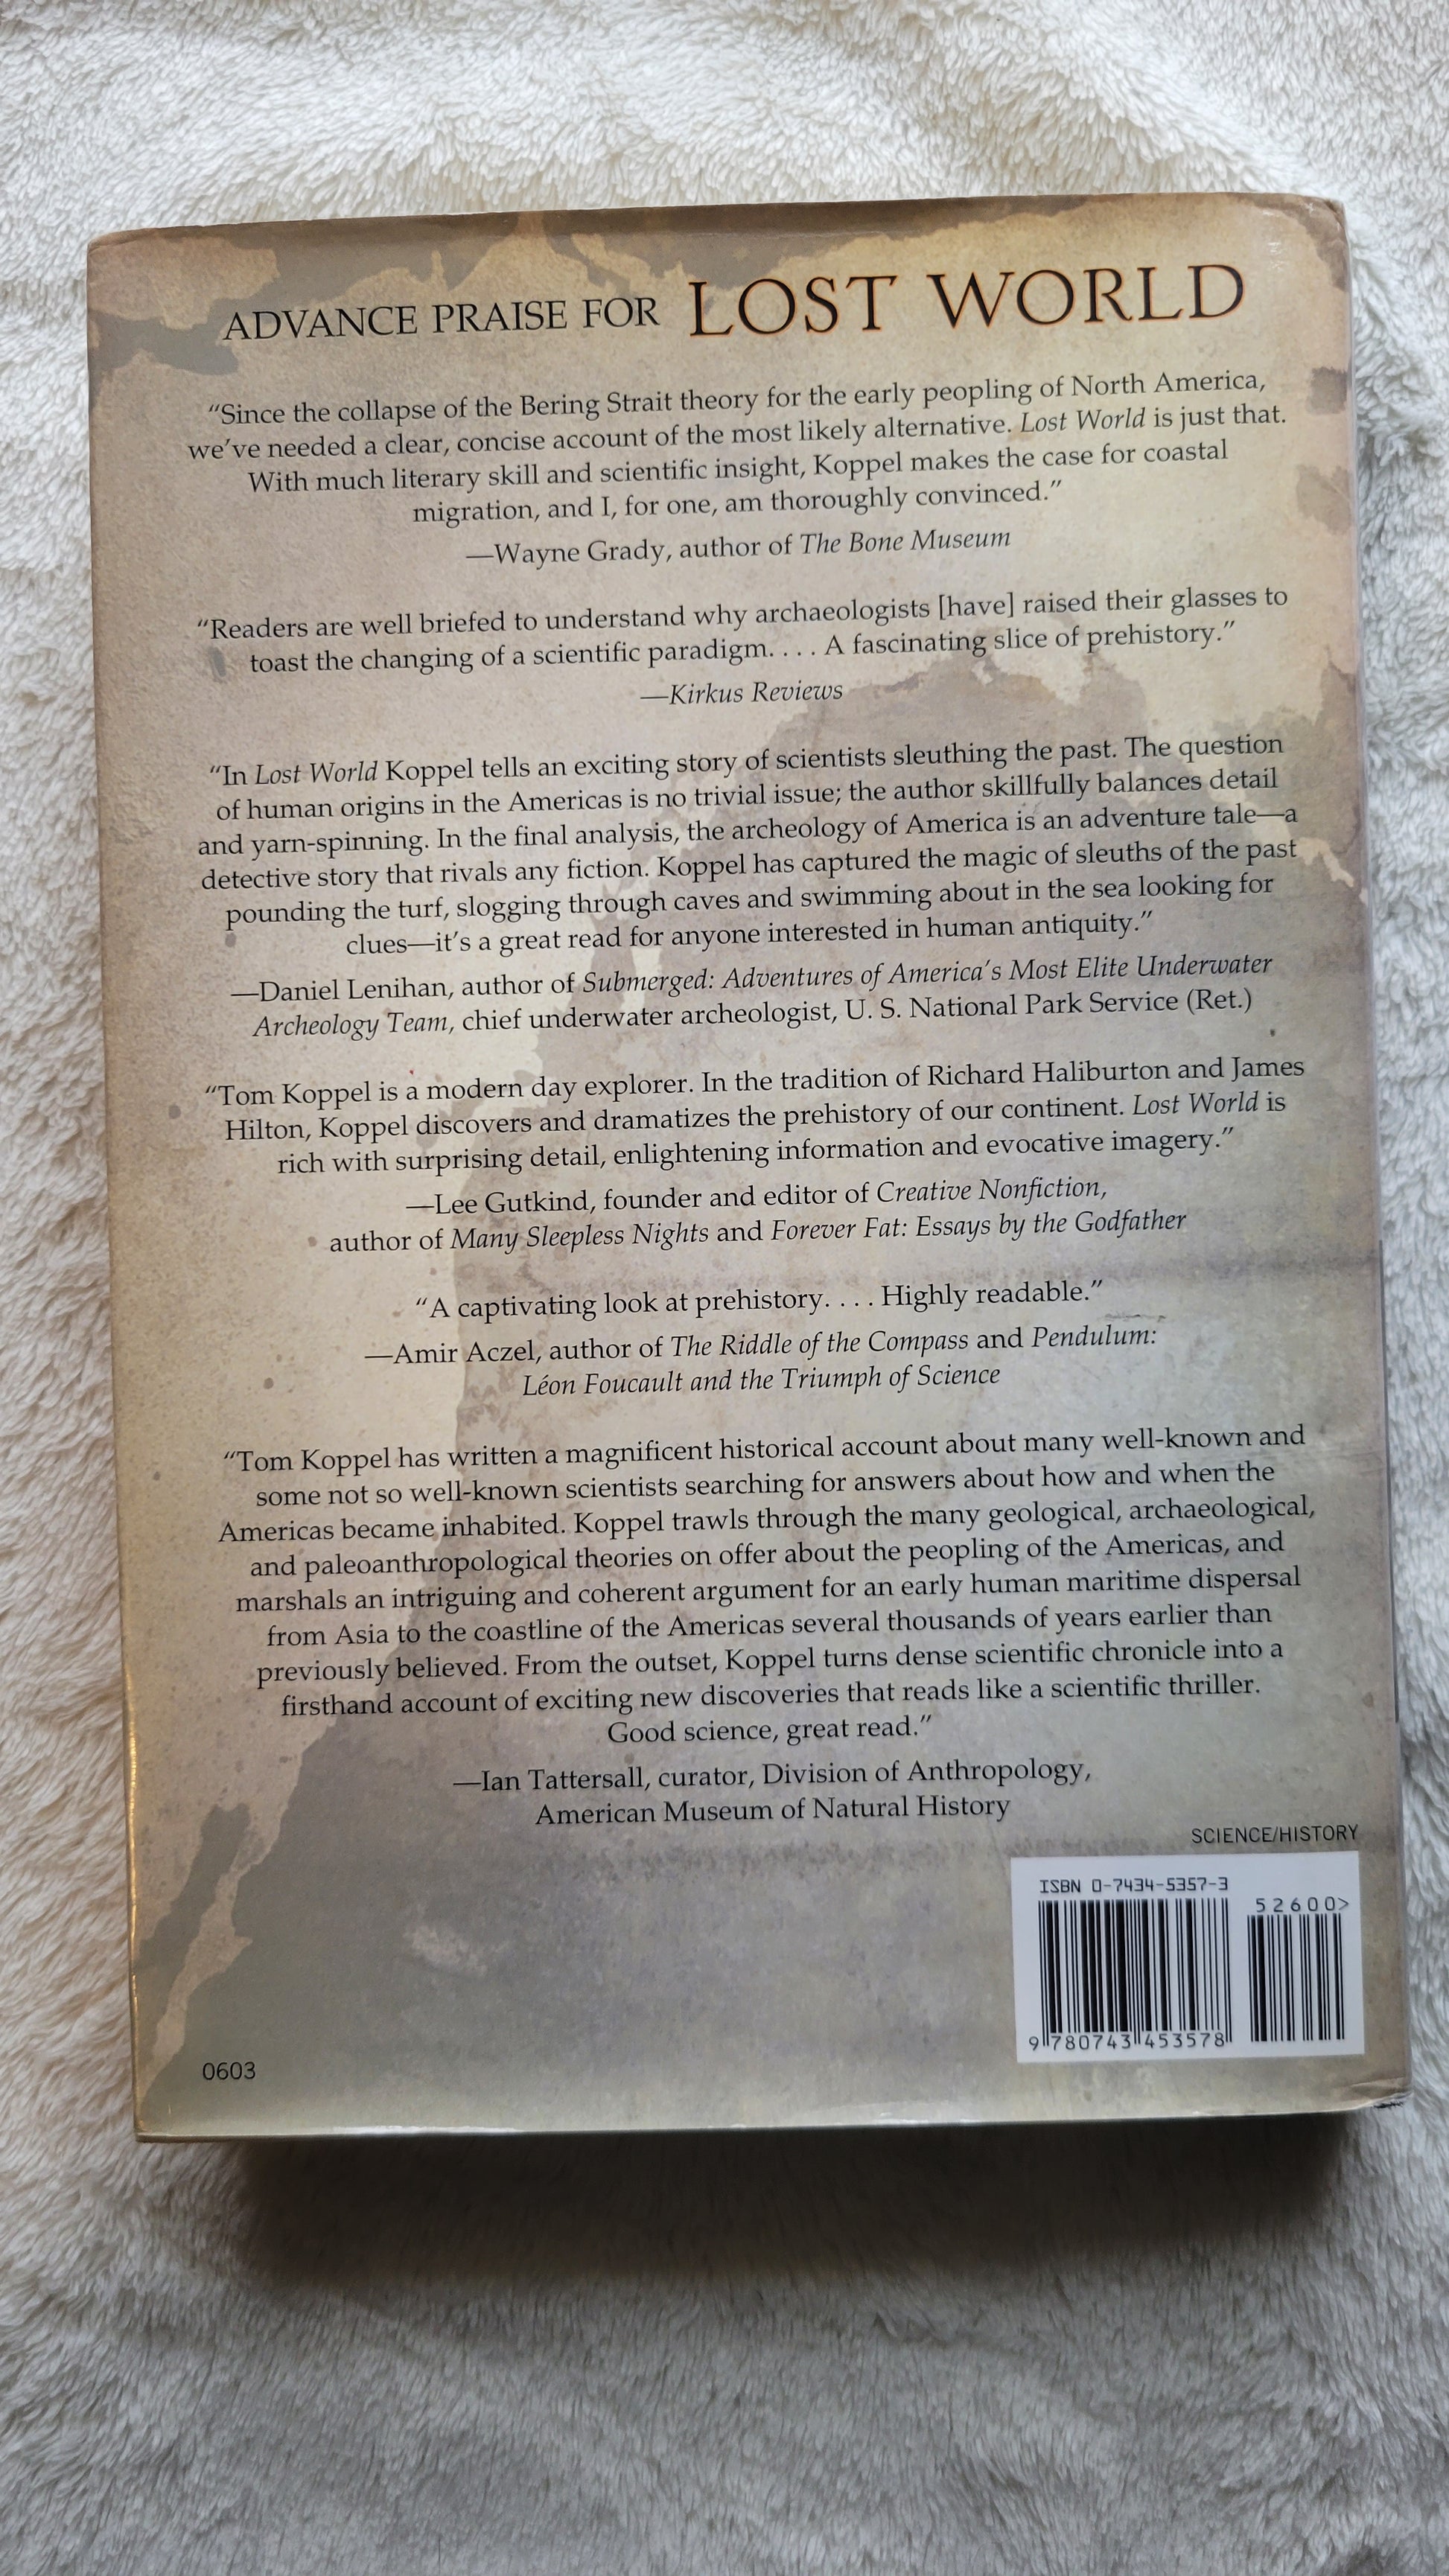 Used book for sale, "Lost World: Rewriting Prehistory – How New Science is Tracing America’s Ice Age Mariners" written by Tom Koppel, published by Atria Books, 2010. View of back cover.  